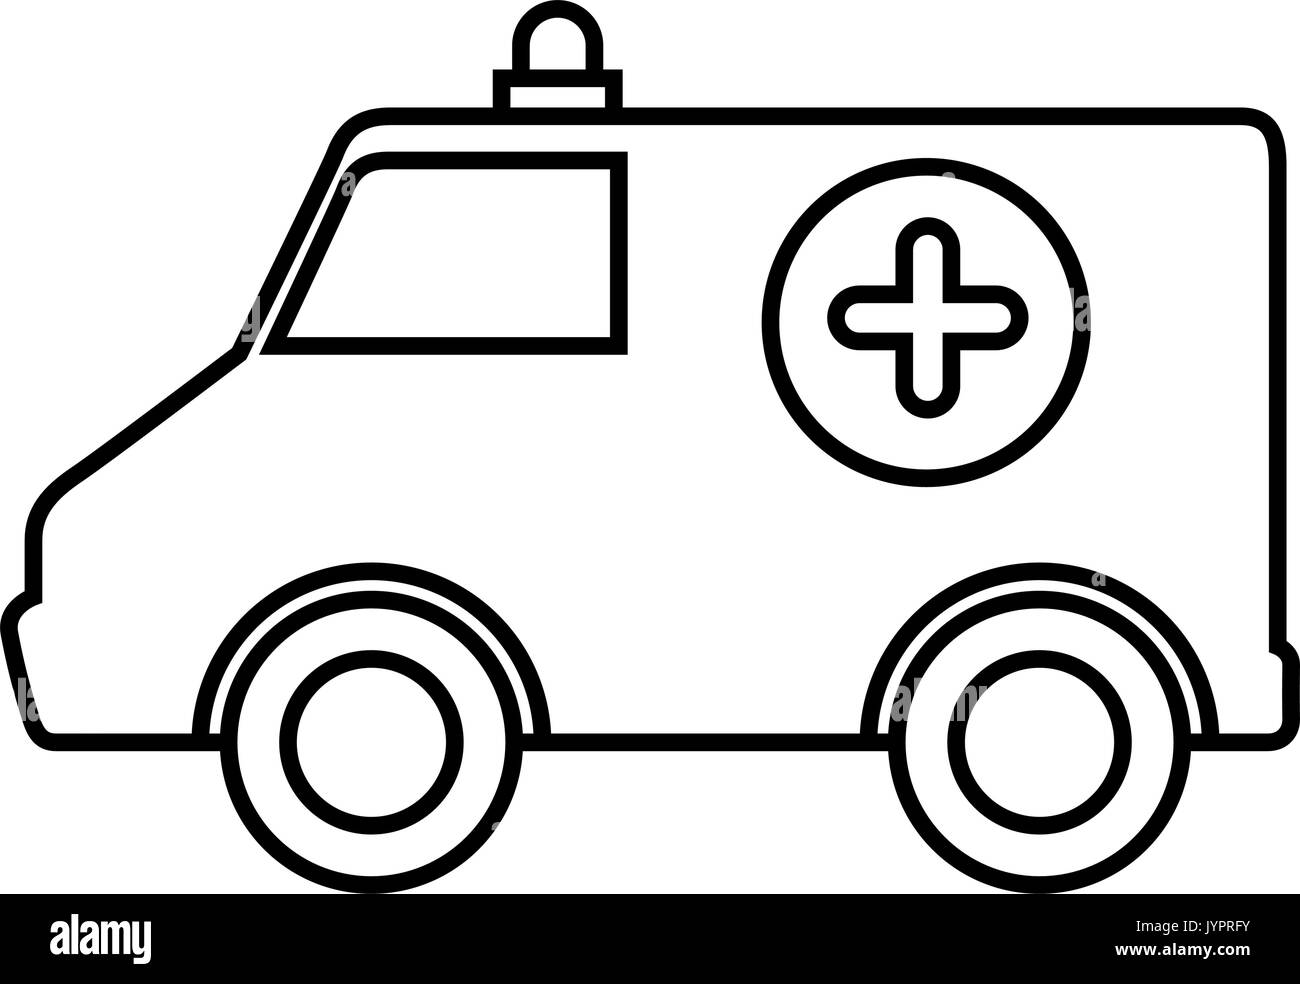 ambulance icon over white background vector illustration Stock Vector